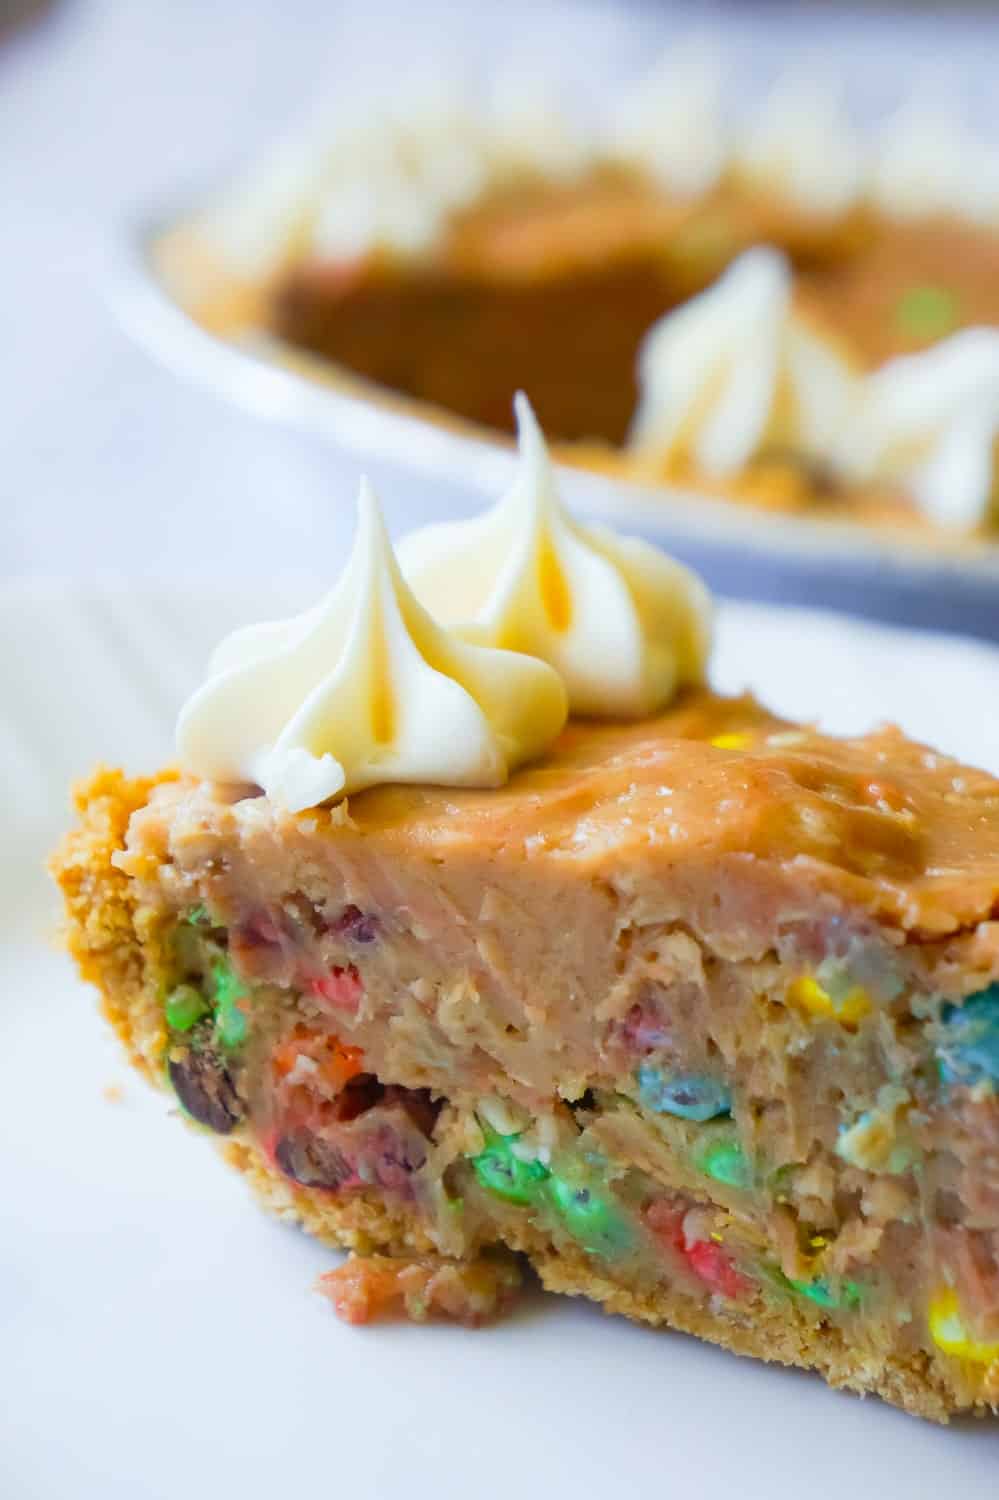 No Bake Monster Cookie Dough Cheesecake is a delicious dessert recipe with a graham cookie crust, filled with a monster cookie dough and cream cheese mixture and topped with cream cheese frosting.